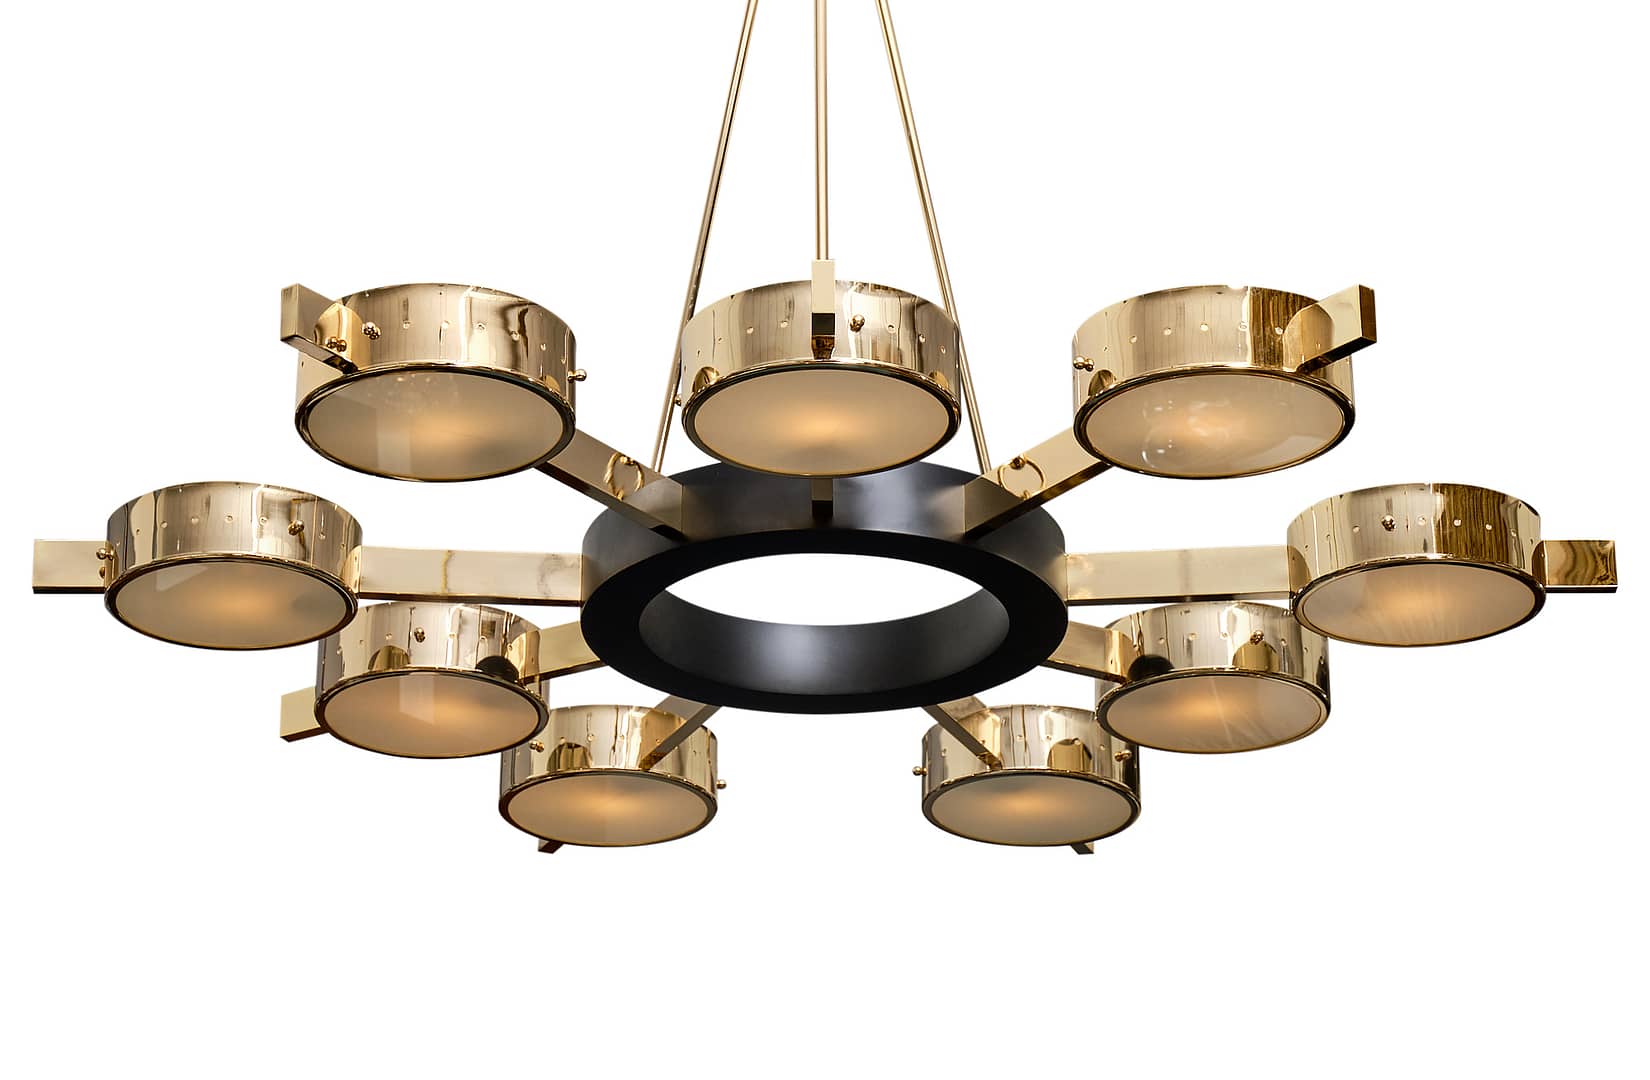 Chandelier from the region of Venice, Italy. This spectacular fixture features nine solid galvanized brass circular arms attached to the lacquered steel crown. This fixture has been newly wired to fit US standards. It requires nine medium-base bulbs.